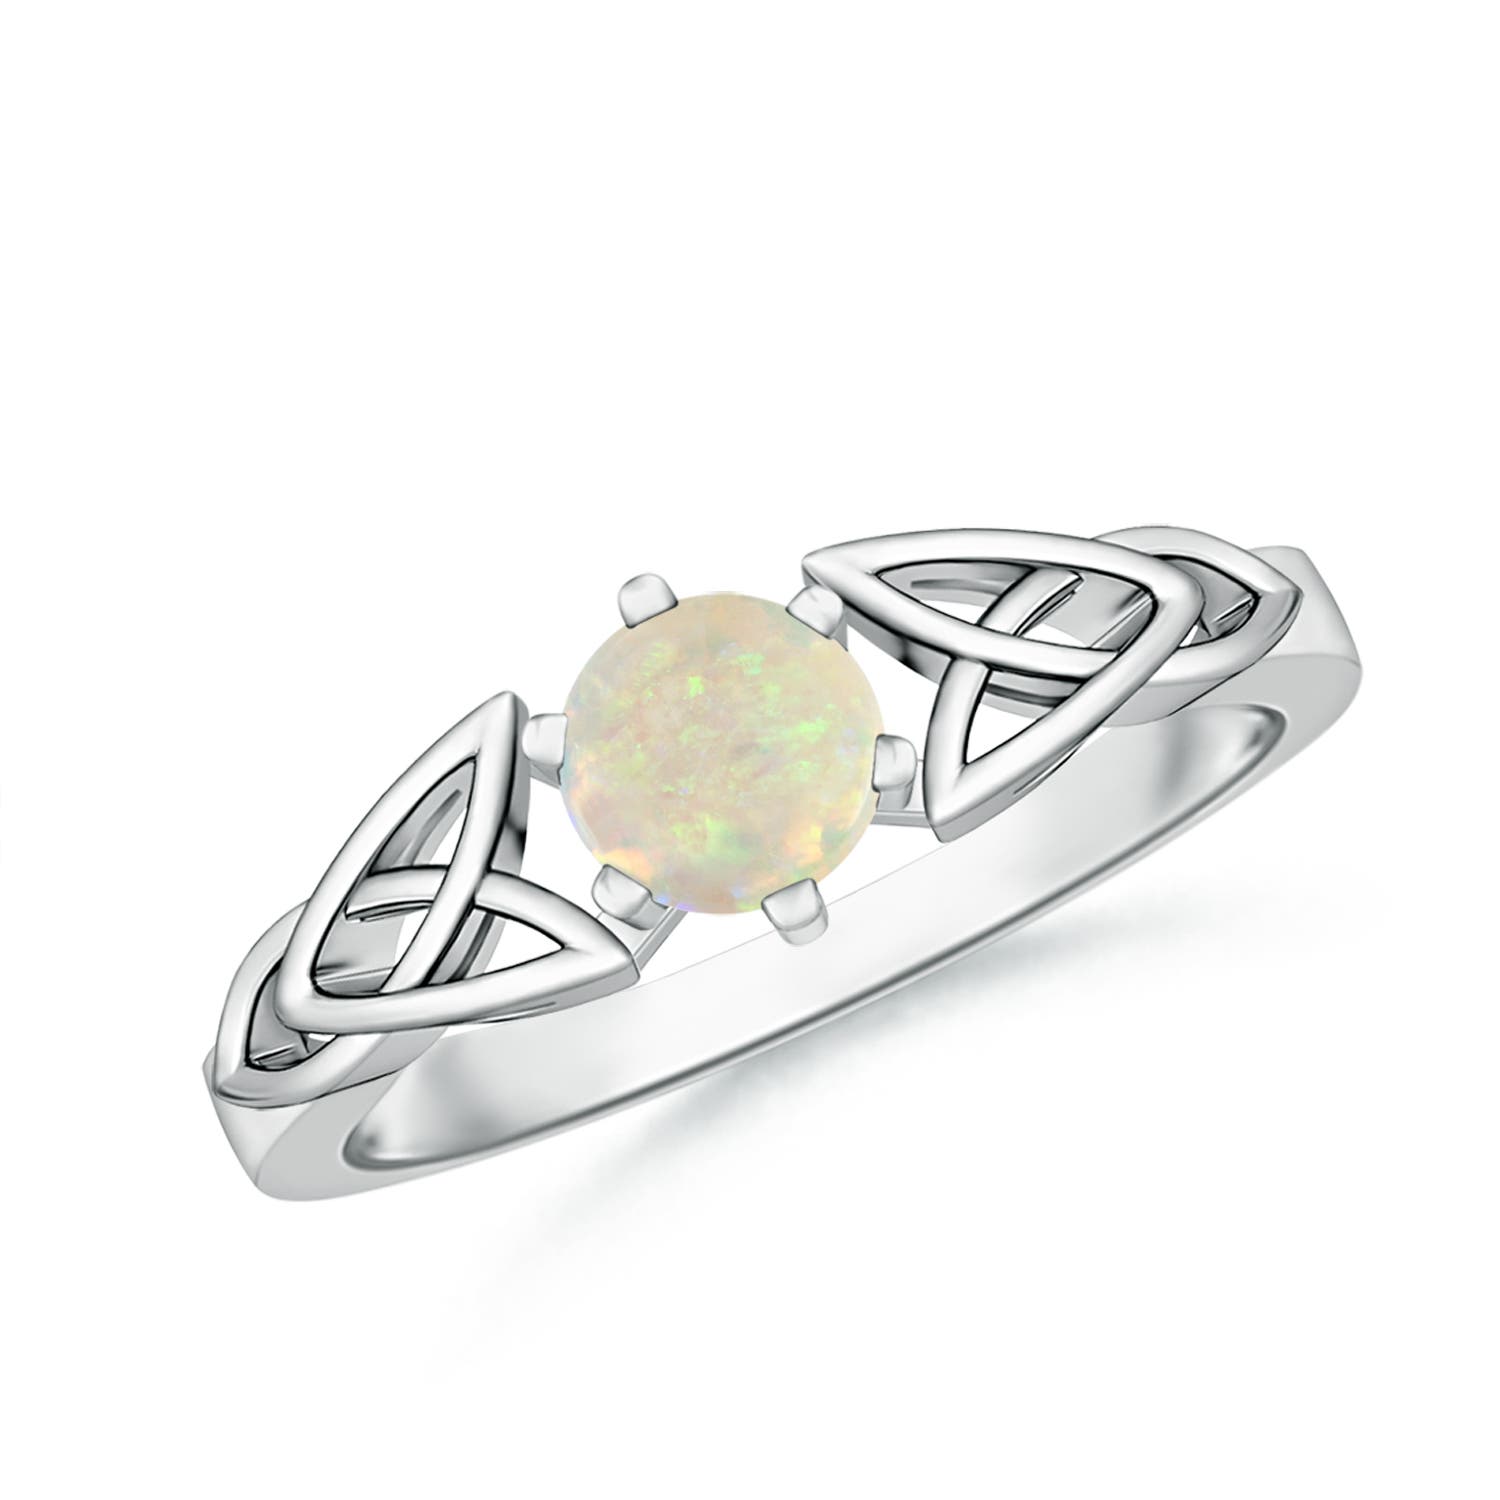 AAA - Opal / 0.33 CT / 14 KT White Gold